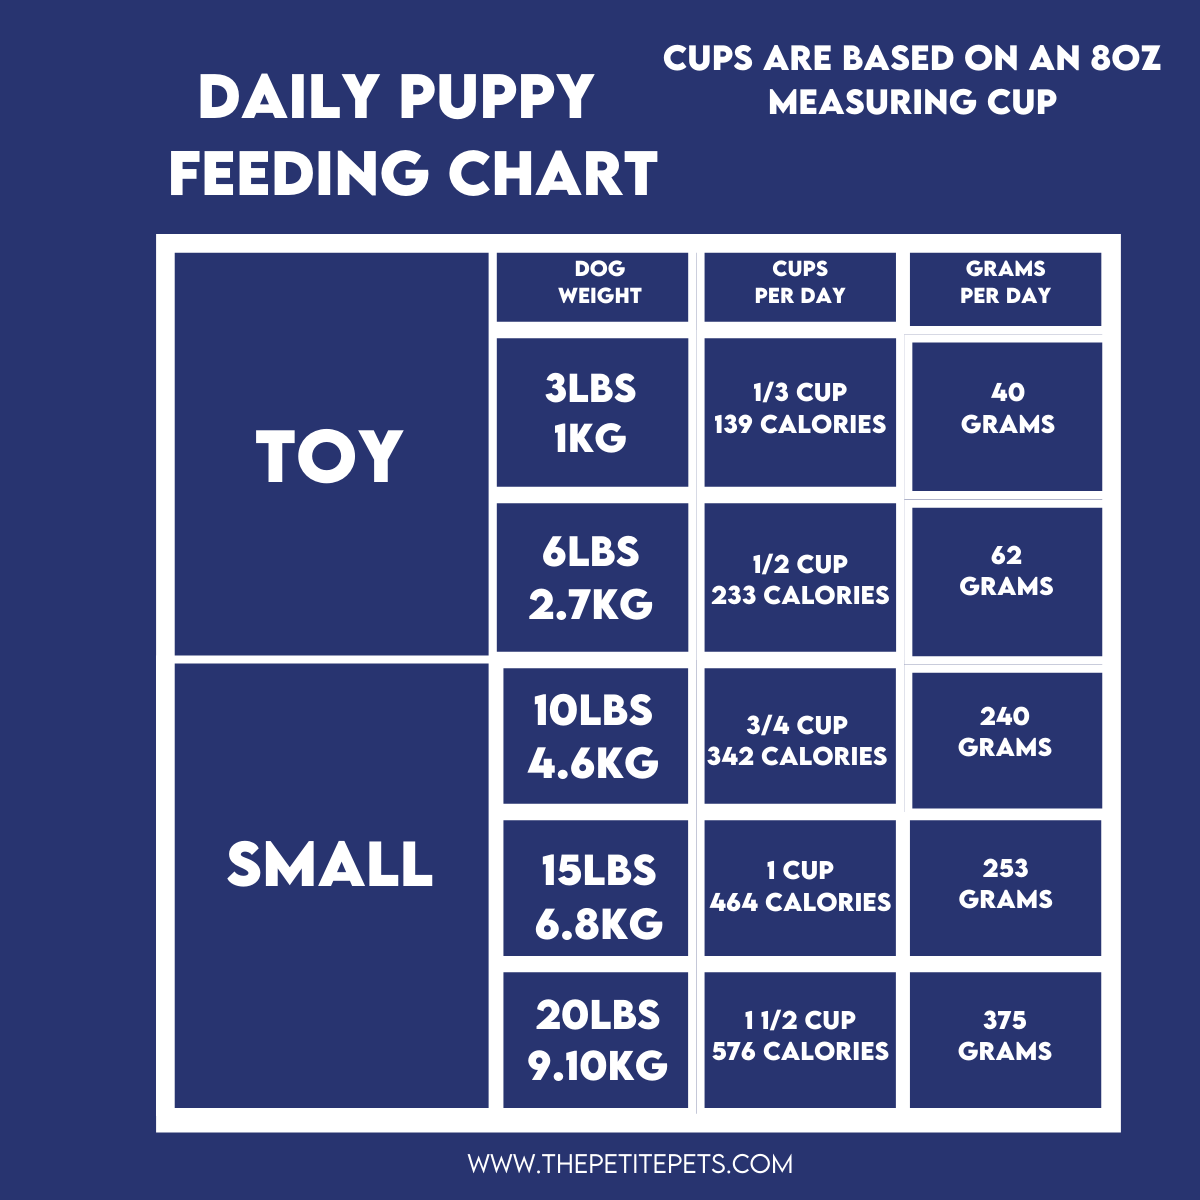 Ages 2-8 Feeding Recommendations